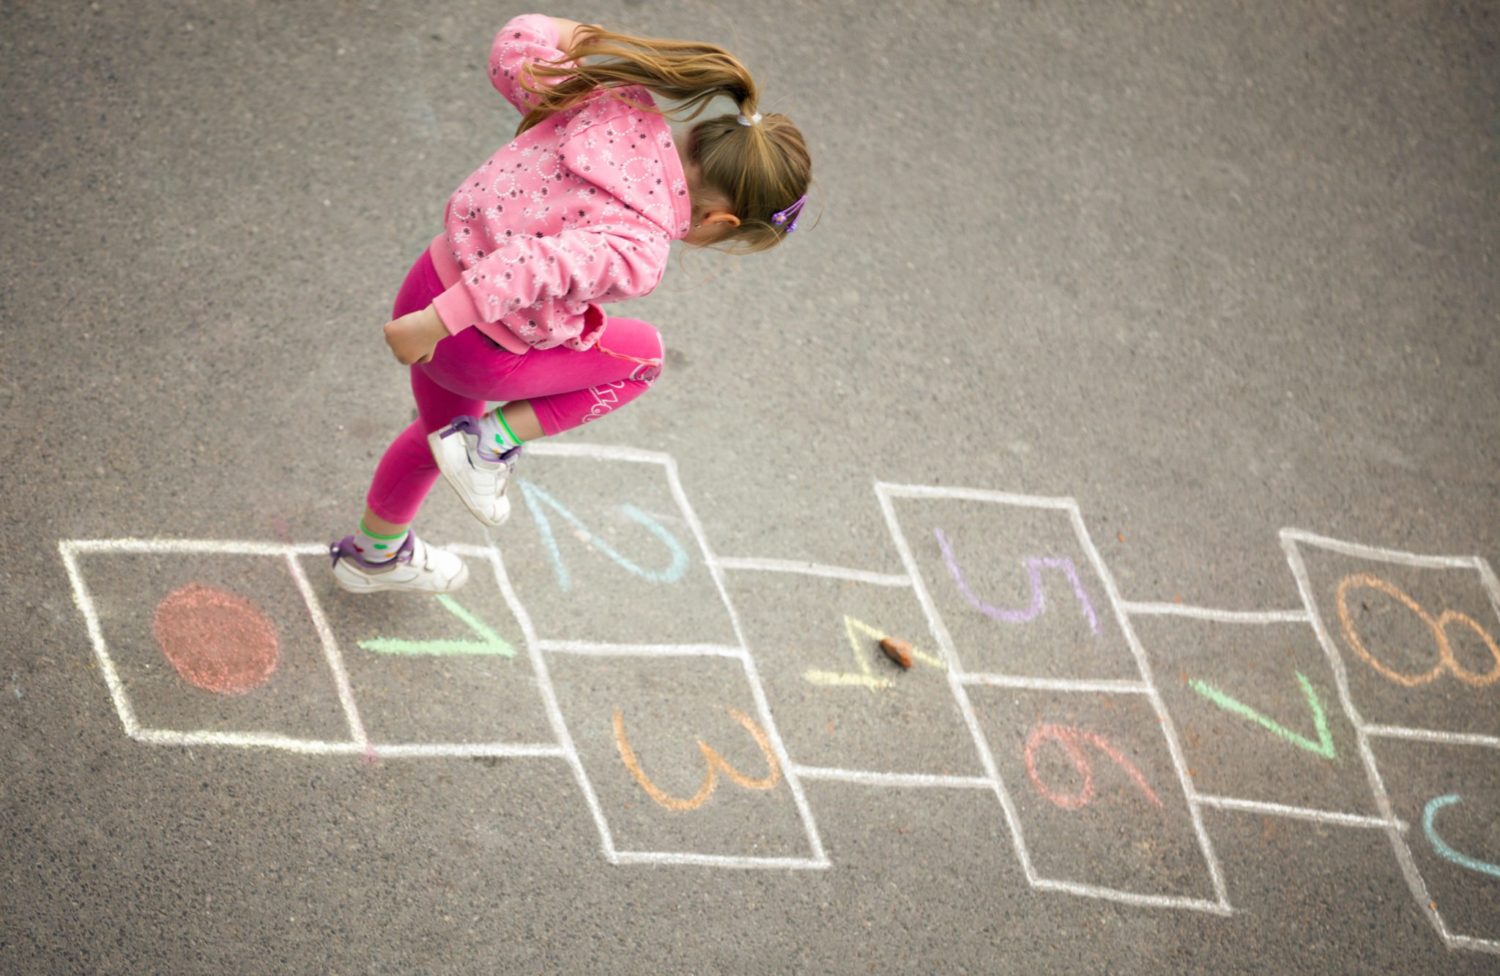 How to Play Hopscotch Guide to Hopscotch Rules & Instructions